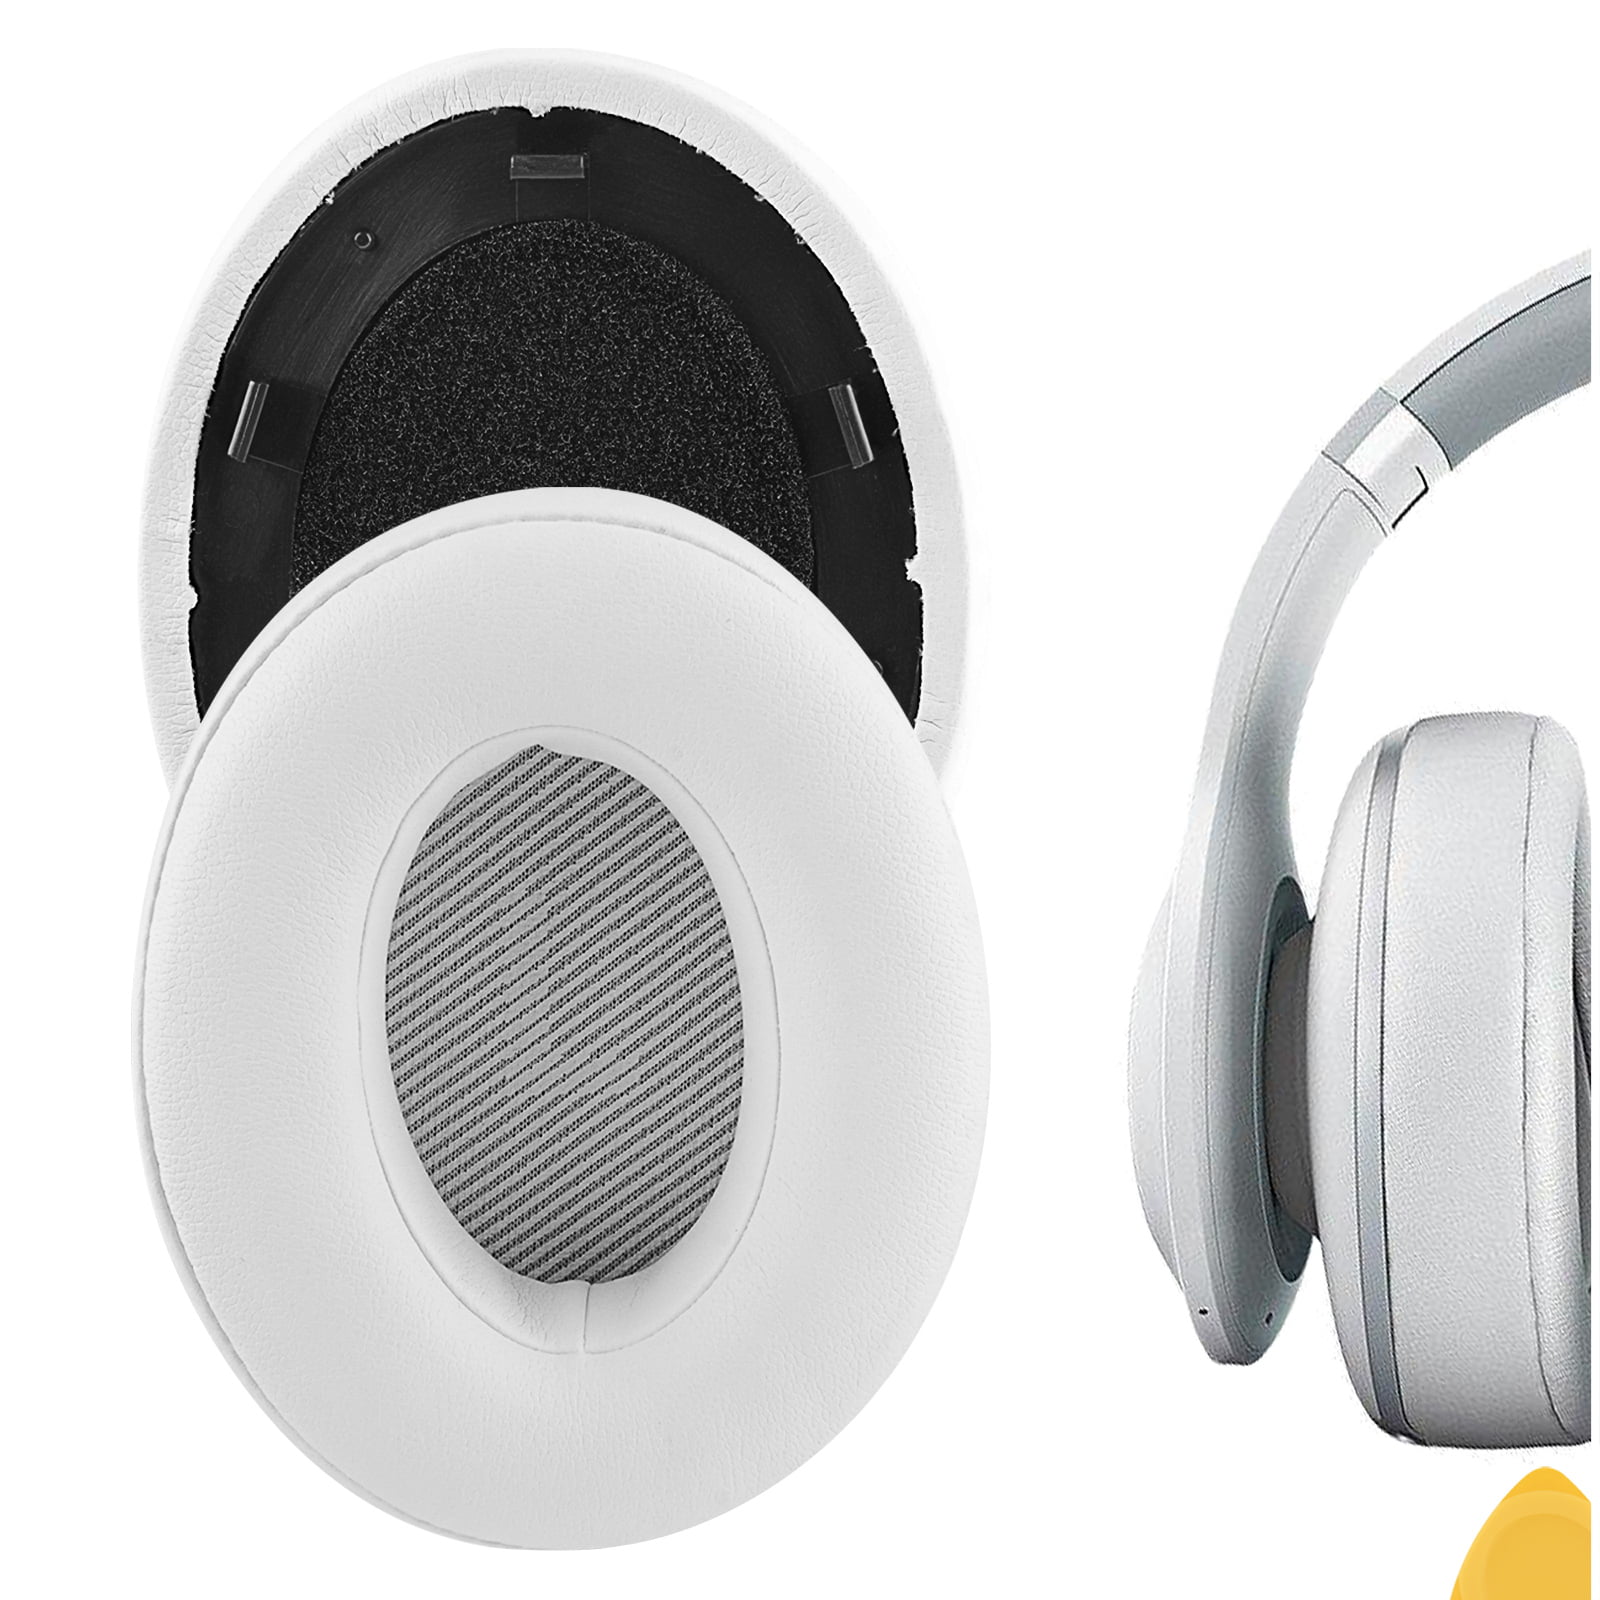 QuickFit Protein Leather Replacement Ear Pads JBL Everest 700, Headphones Earpads, Headset Ear Cushion Repair Parts (White) - Walmart.com